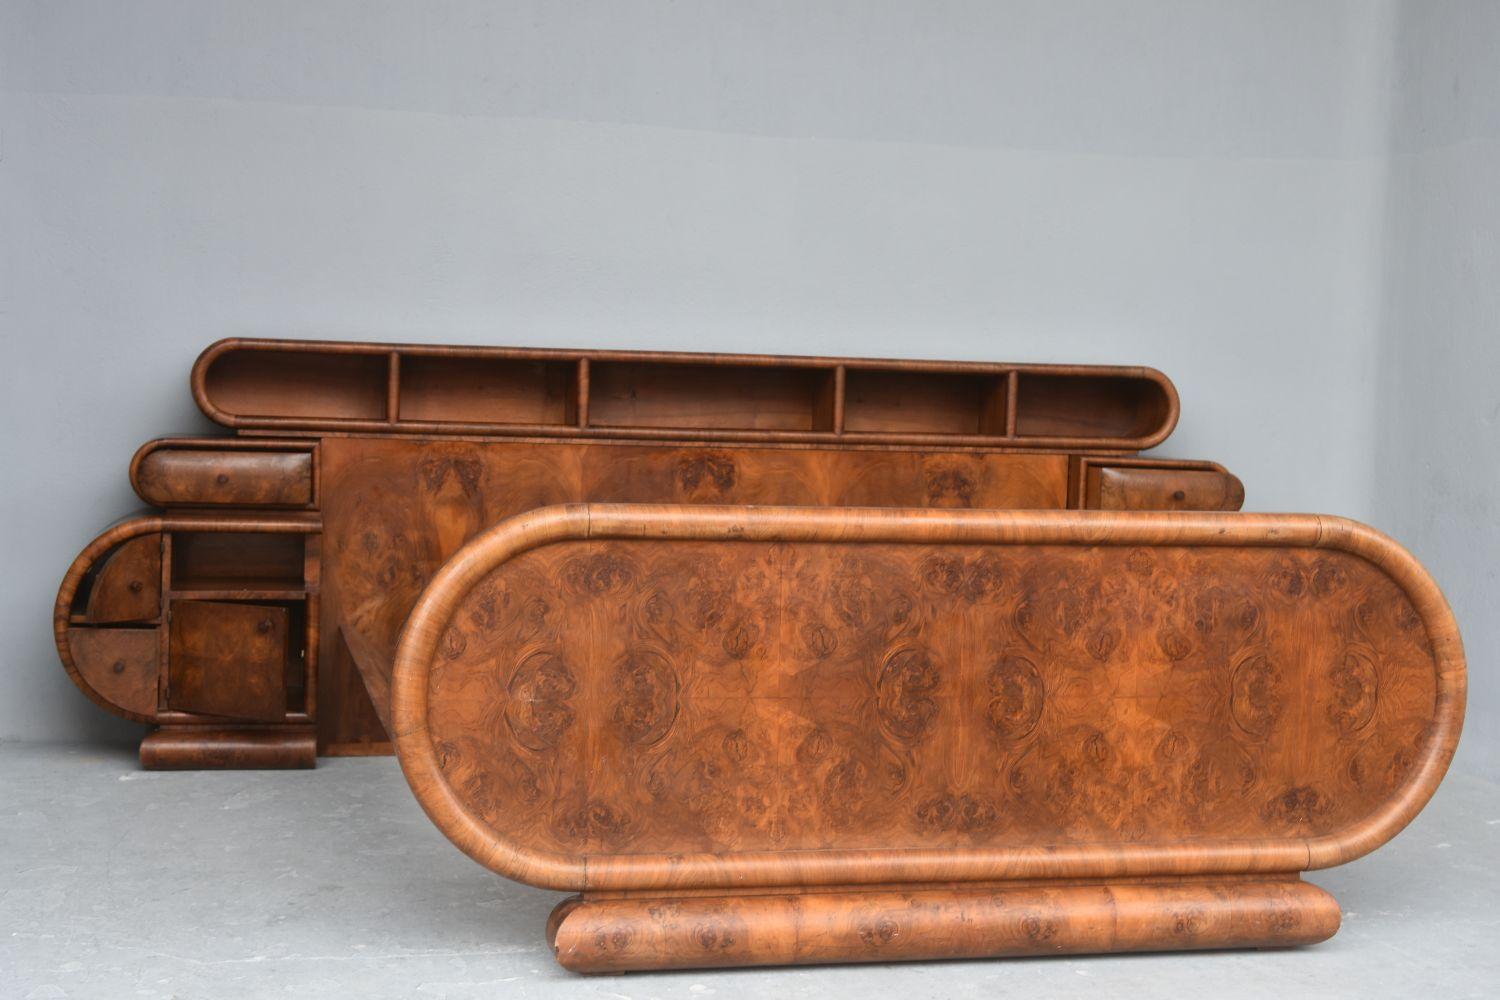 1930s Art Deco Hollywood Bed in Walnut Burl Veneer with its Curved 7